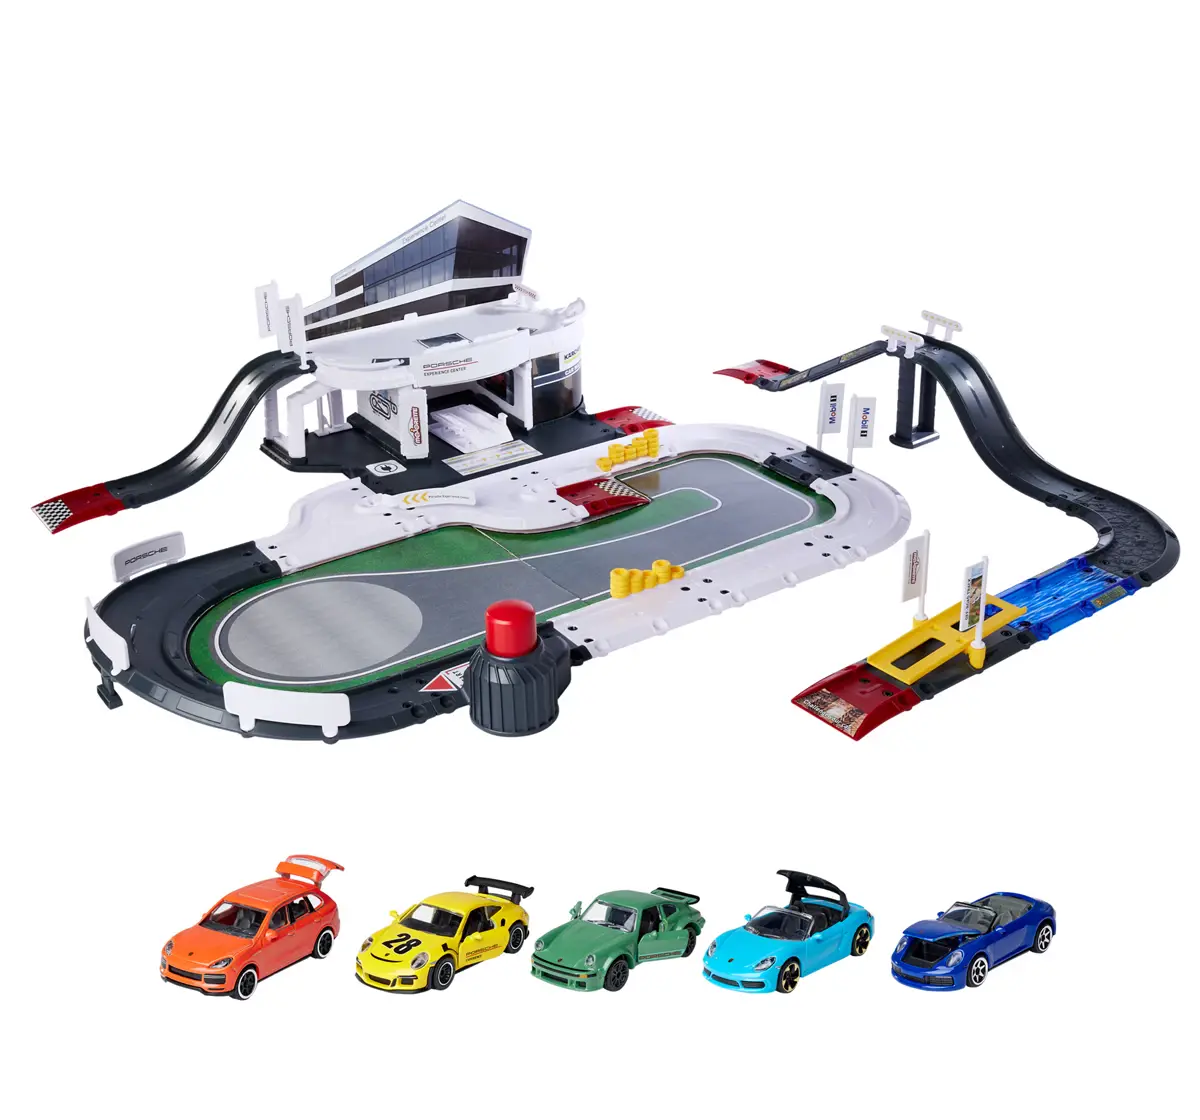 Buy TOYSM 1:32 Diecast Porsche-Cayenne Turbo Car Model Toy Vehicle Alloy  Pull Back Sound Light Sports Car Toys for Children Kids Gifts Online at  Lowest Price Ever in India | Check Reviews